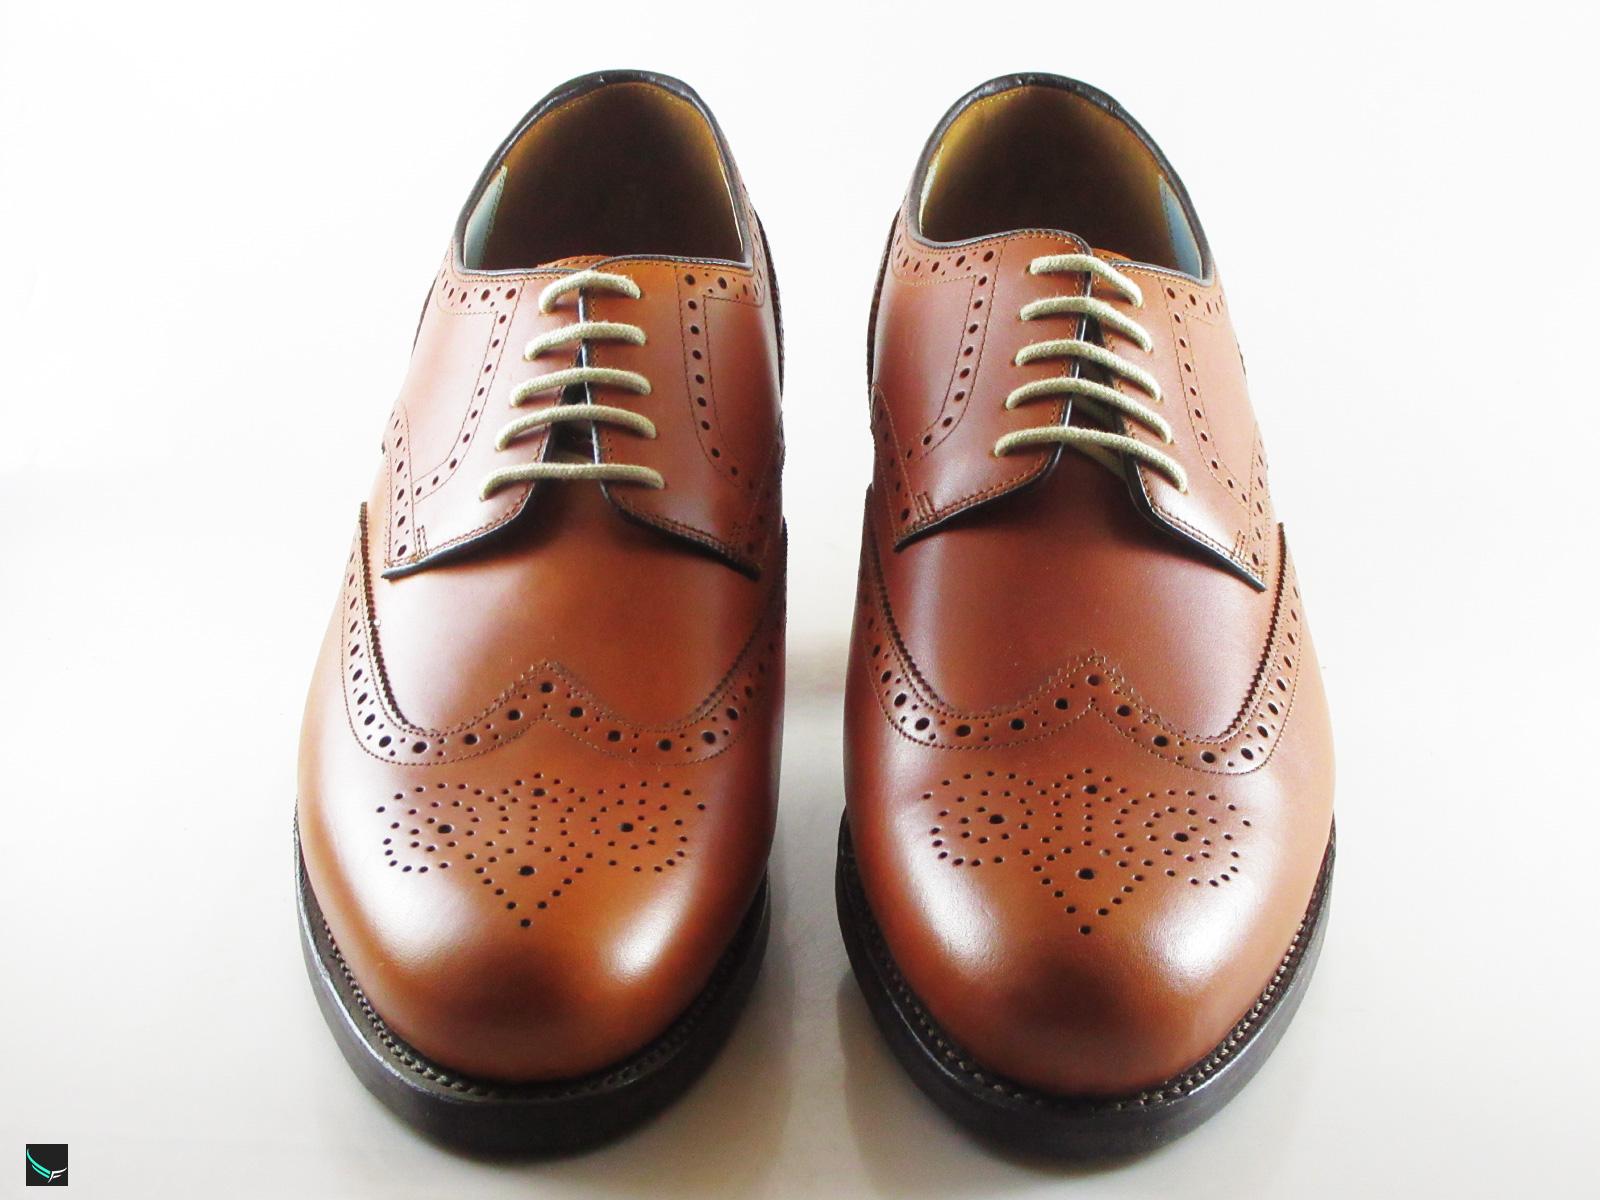 Men's Formal Leather Attractive Shoes - 3474 - Leather Collections On ...